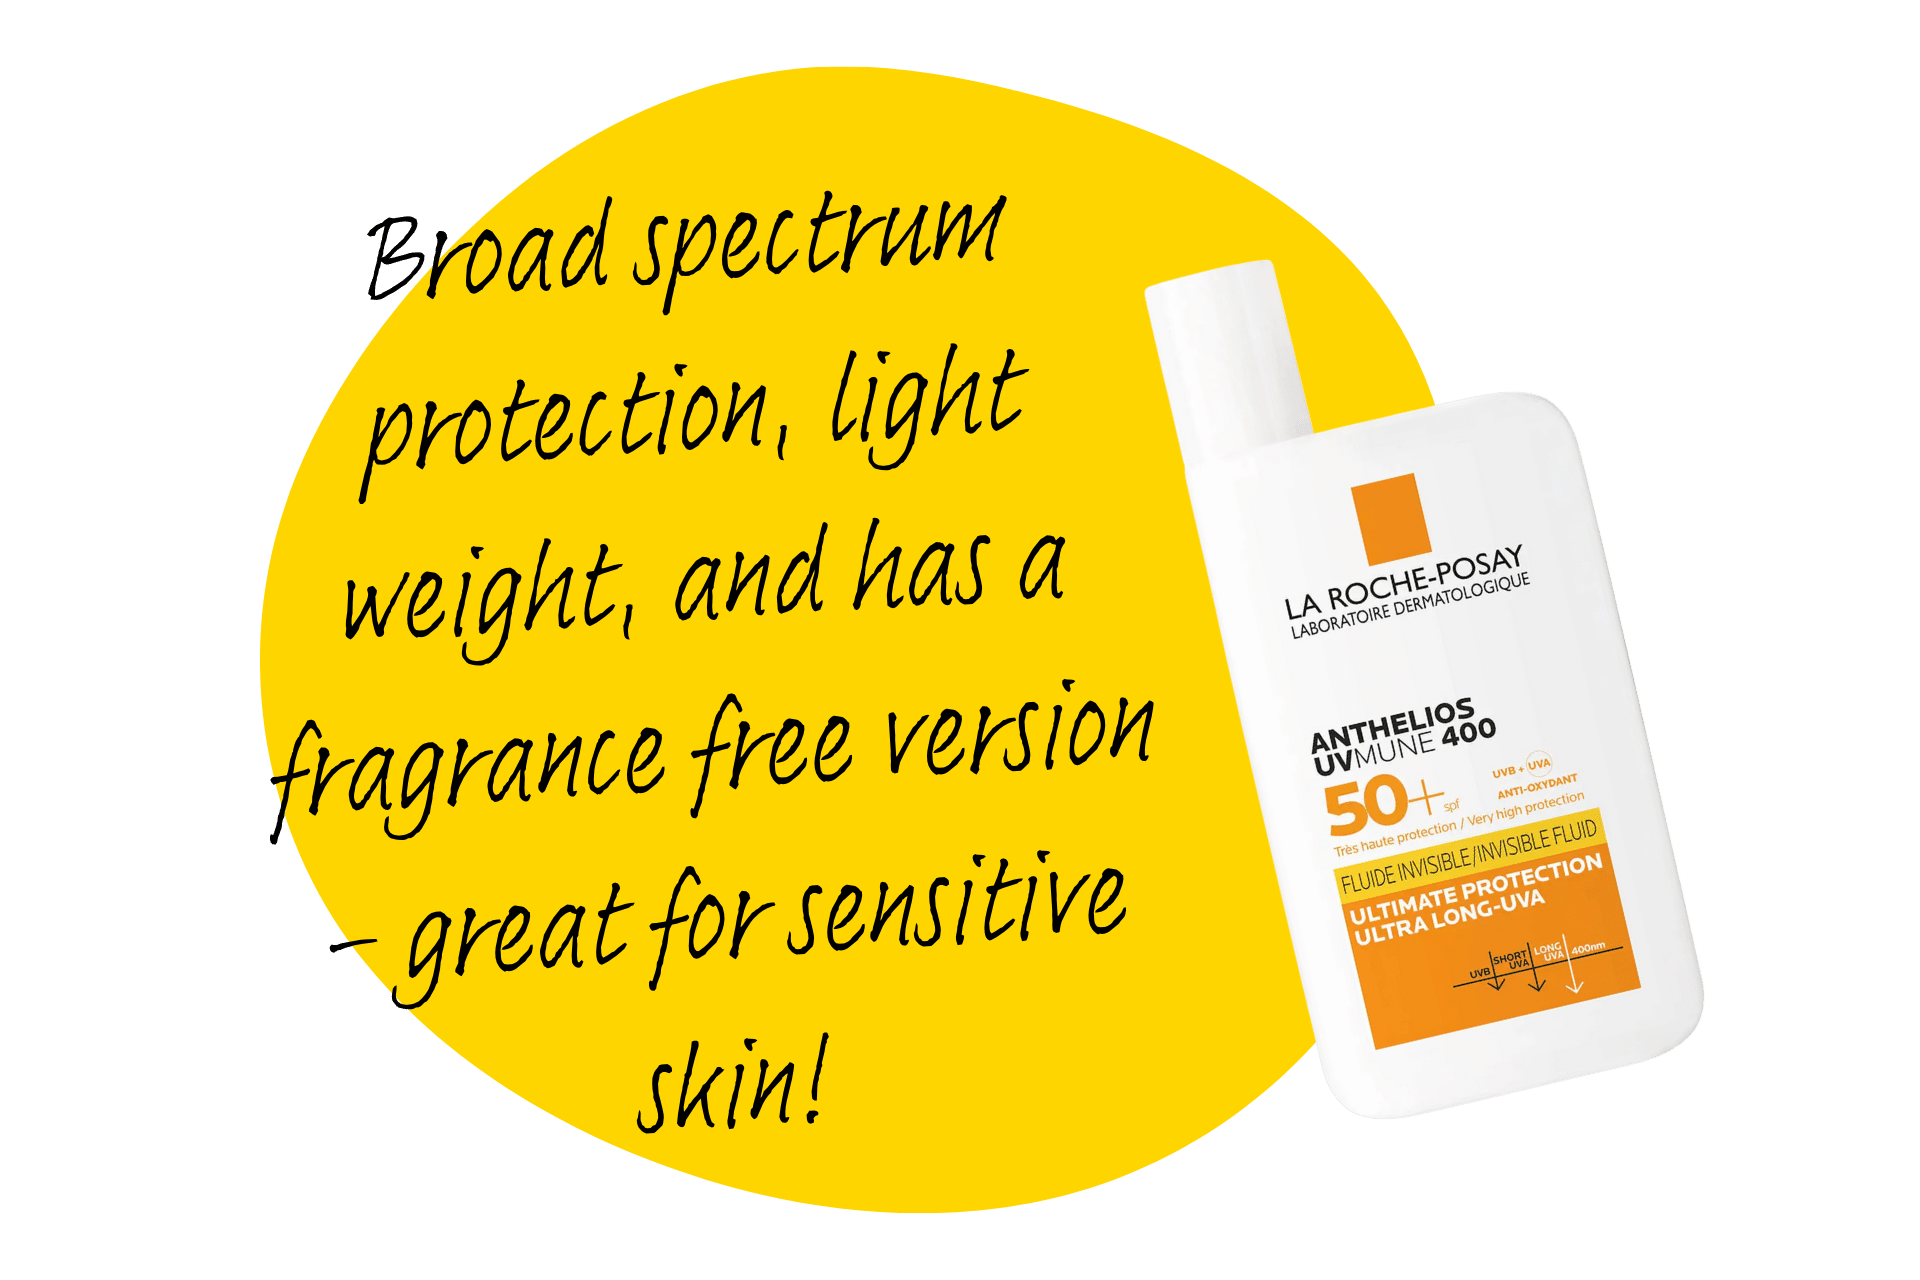 La Roche-Posay Anthelios UVMUNE 400 Invisible Fluid SPF 50+ has broad spectrum protection, is light weight and has a fragrance free version for sensitive skin, making it one of the best sunscreens right now.